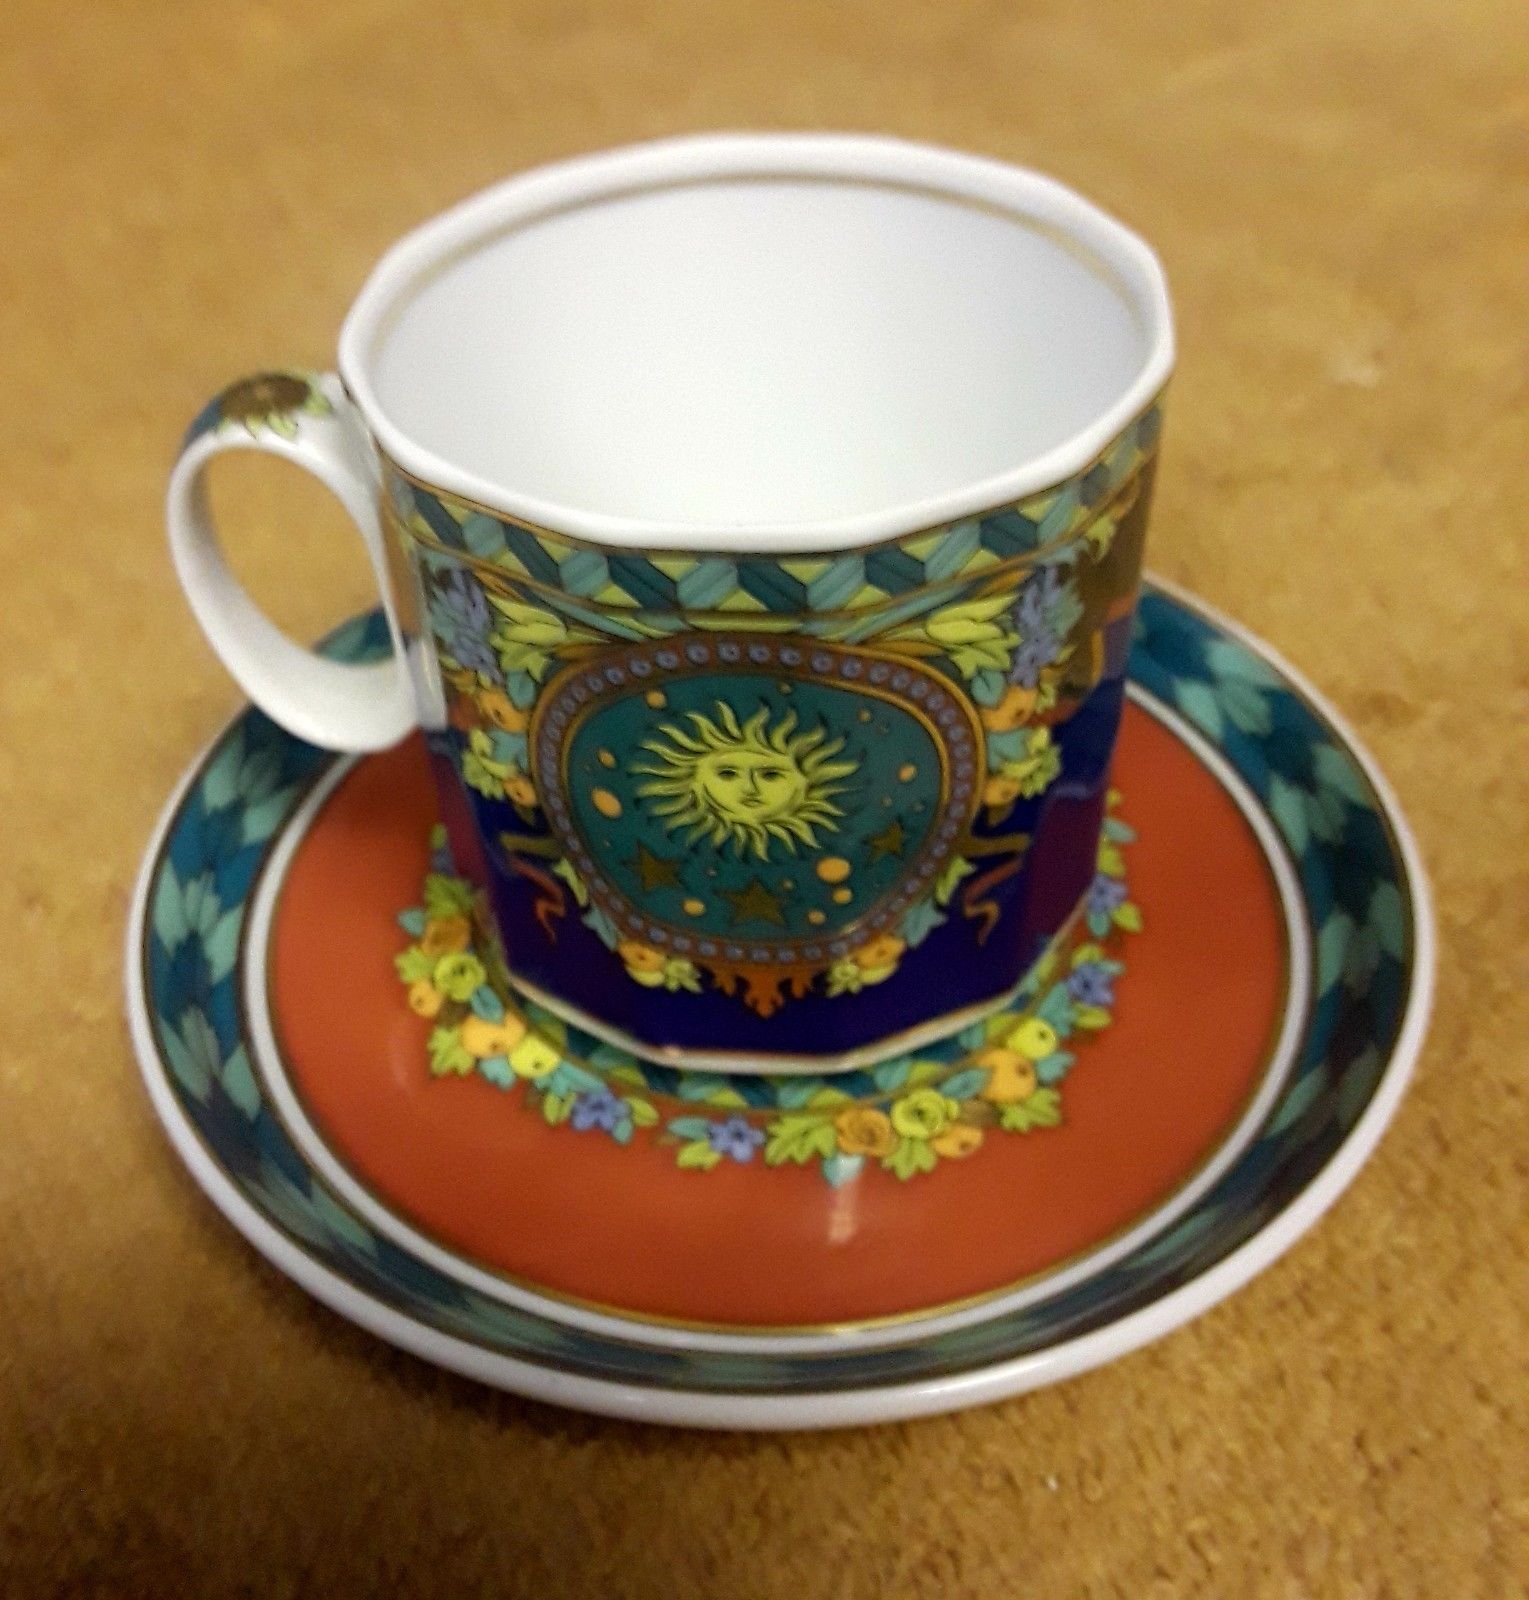 Rosenthal Versace Le Roi Soleil Espresso Cup And Saucer #1 -- Antique ...